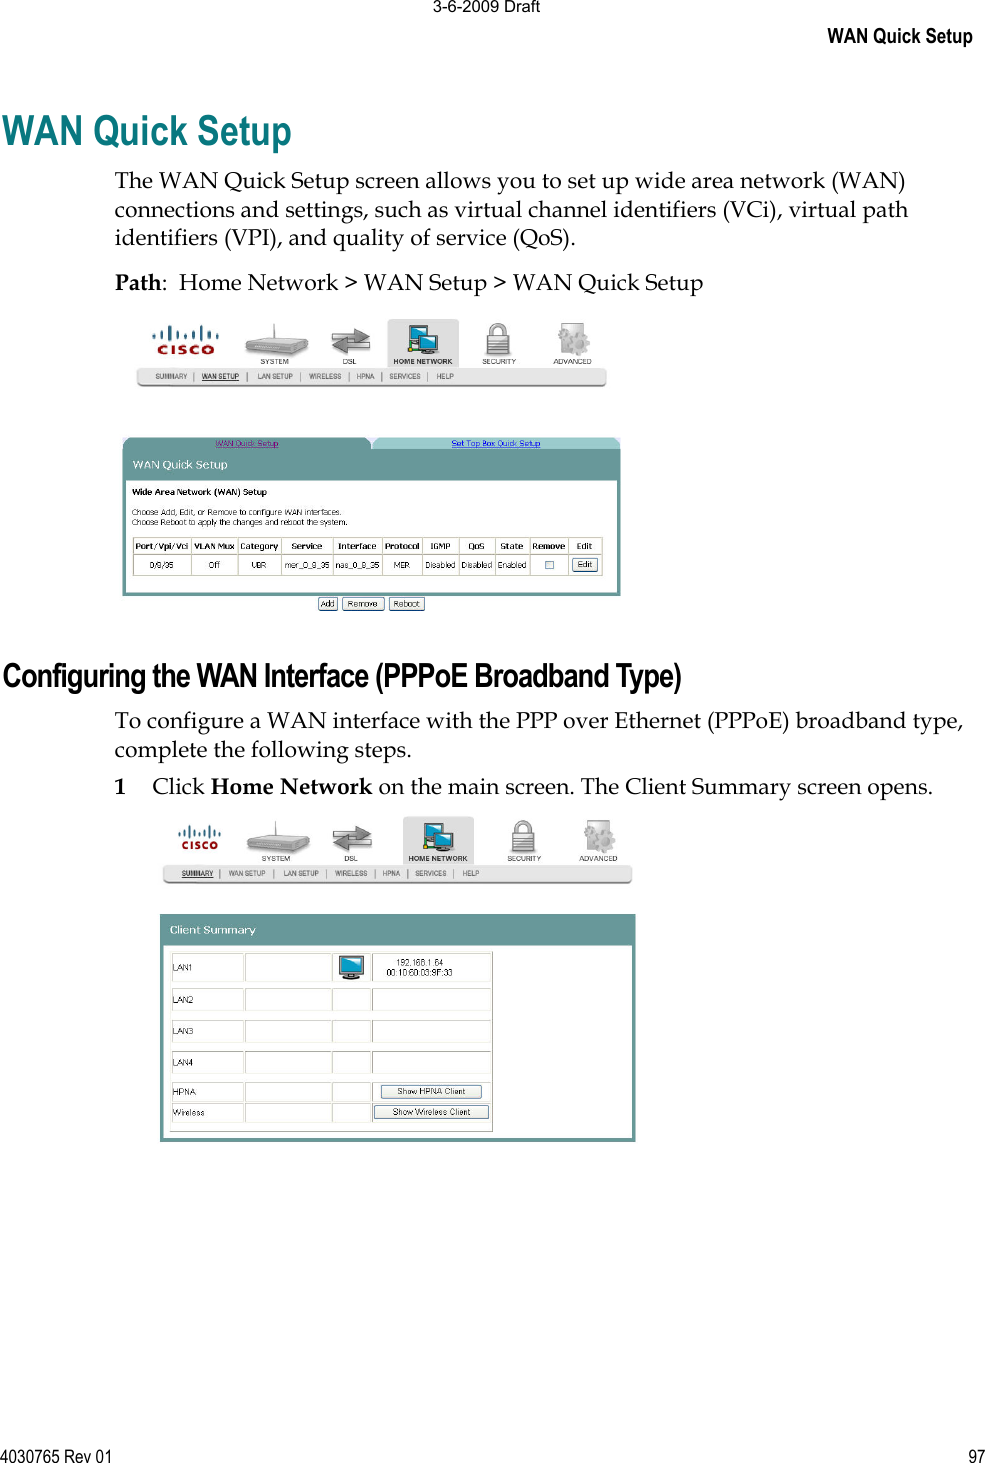 WAN Quick Setup 4030765 Rev 01 97WAN Quick Setup The WAN Quick Setup screen allows you to set up wide area network (WAN) connections and settings, such as virtual channel identifiers (VCi), virtual path identifiers (VPI), and quality of service (QoS). Path:  Home Network &gt; WAN Setup &gt; WAN Quick Setup Configuring the WAN Interface (PPPoE Broadband Type) To configure a WAN interface with the PPP over Ethernet (PPPoE) broadband type, complete the following steps. 1Click Home Network on the main screen. The Client Summary screen opens. 3-6-2009 Draft